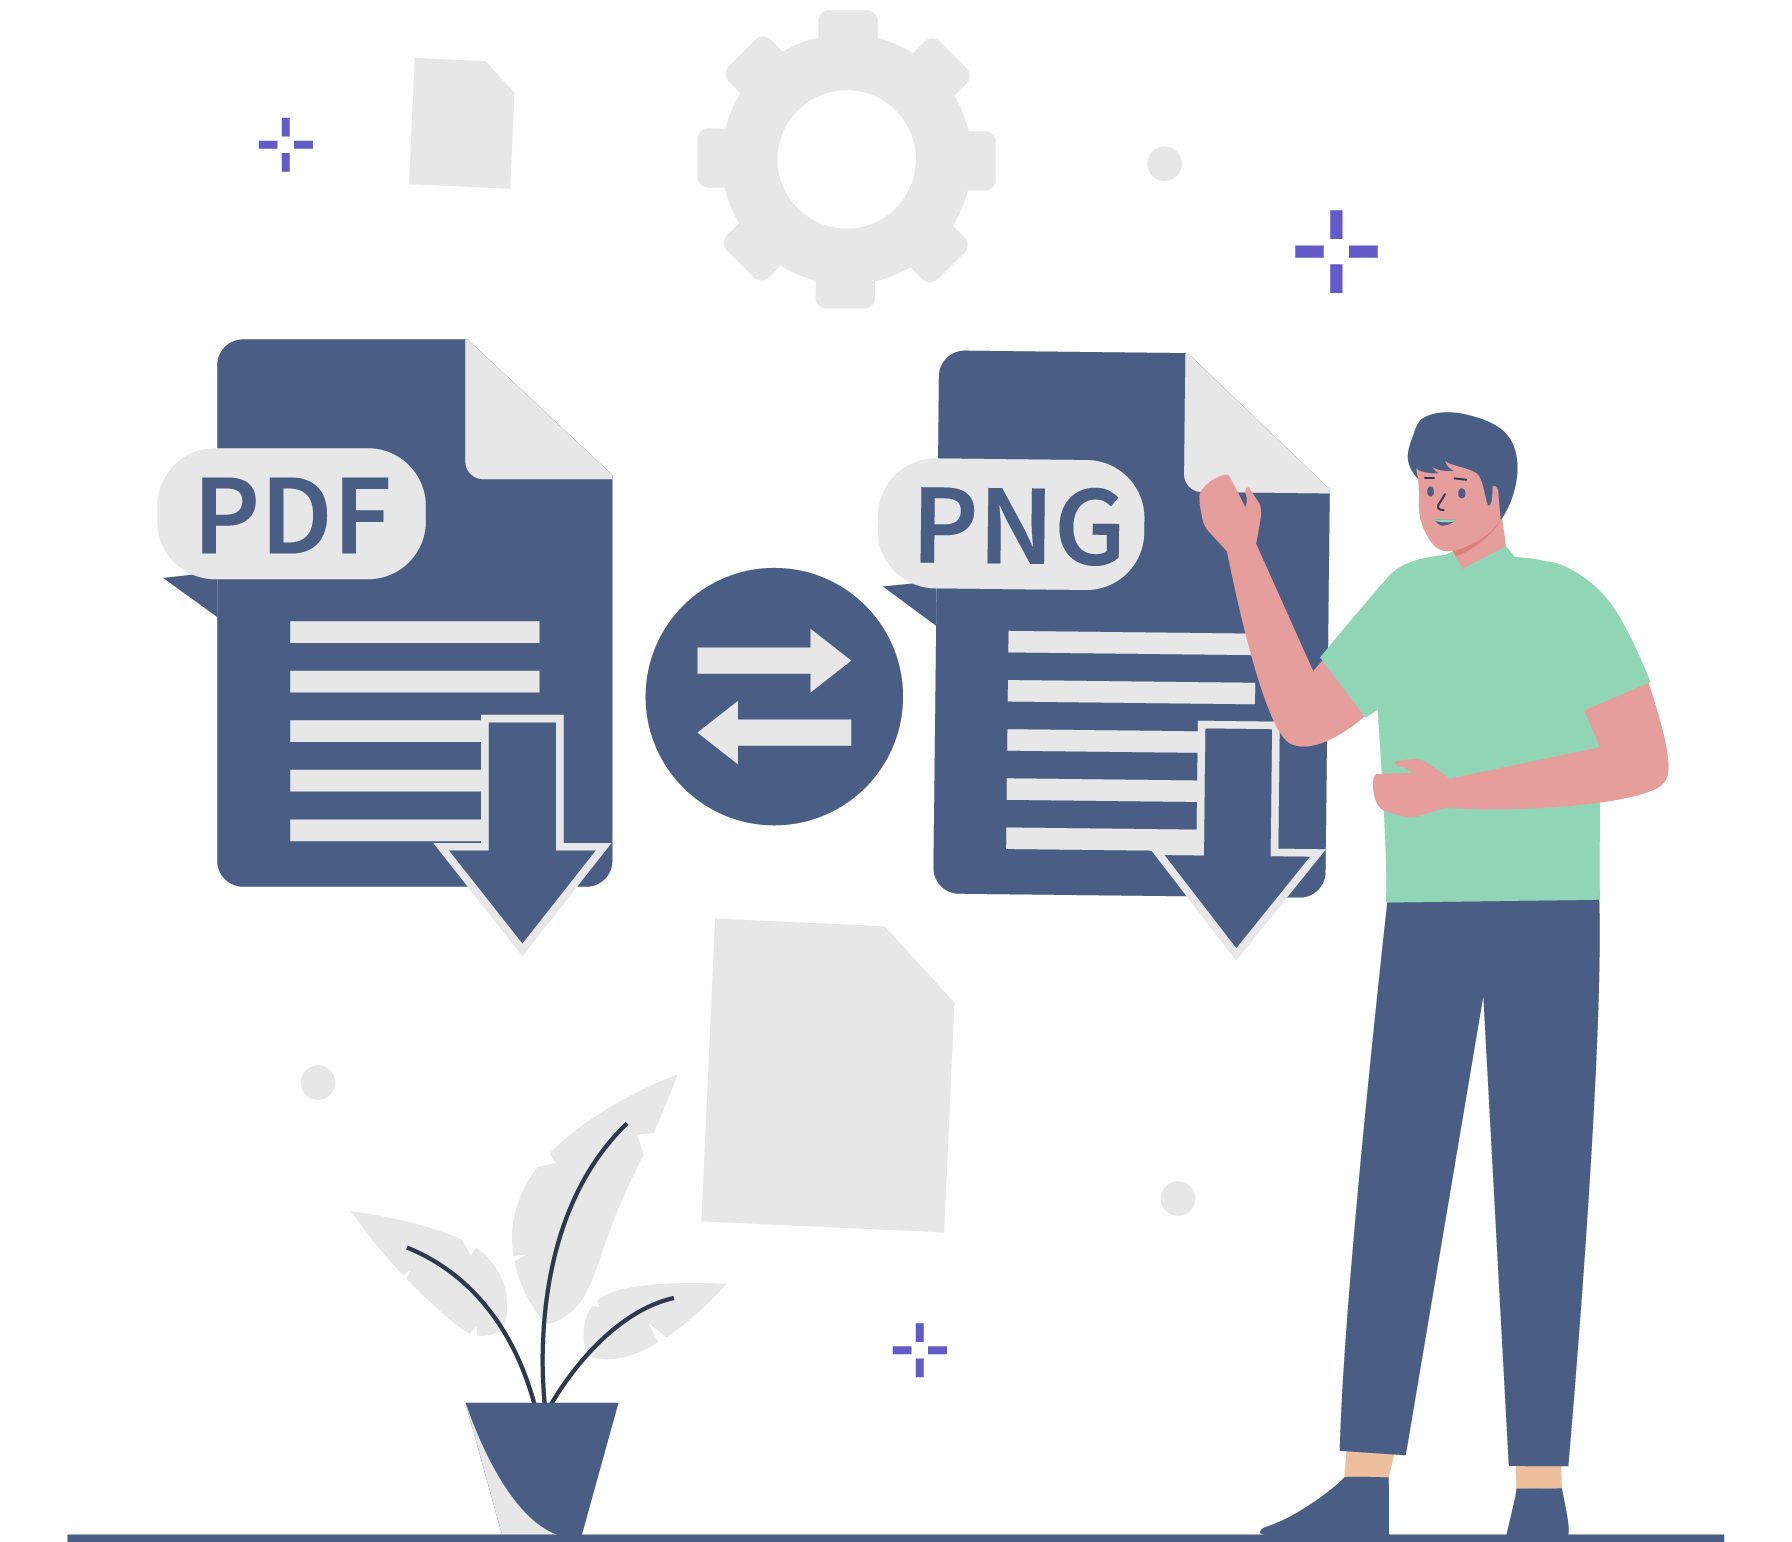 Why use ETTVI's PDF to PNG tool?